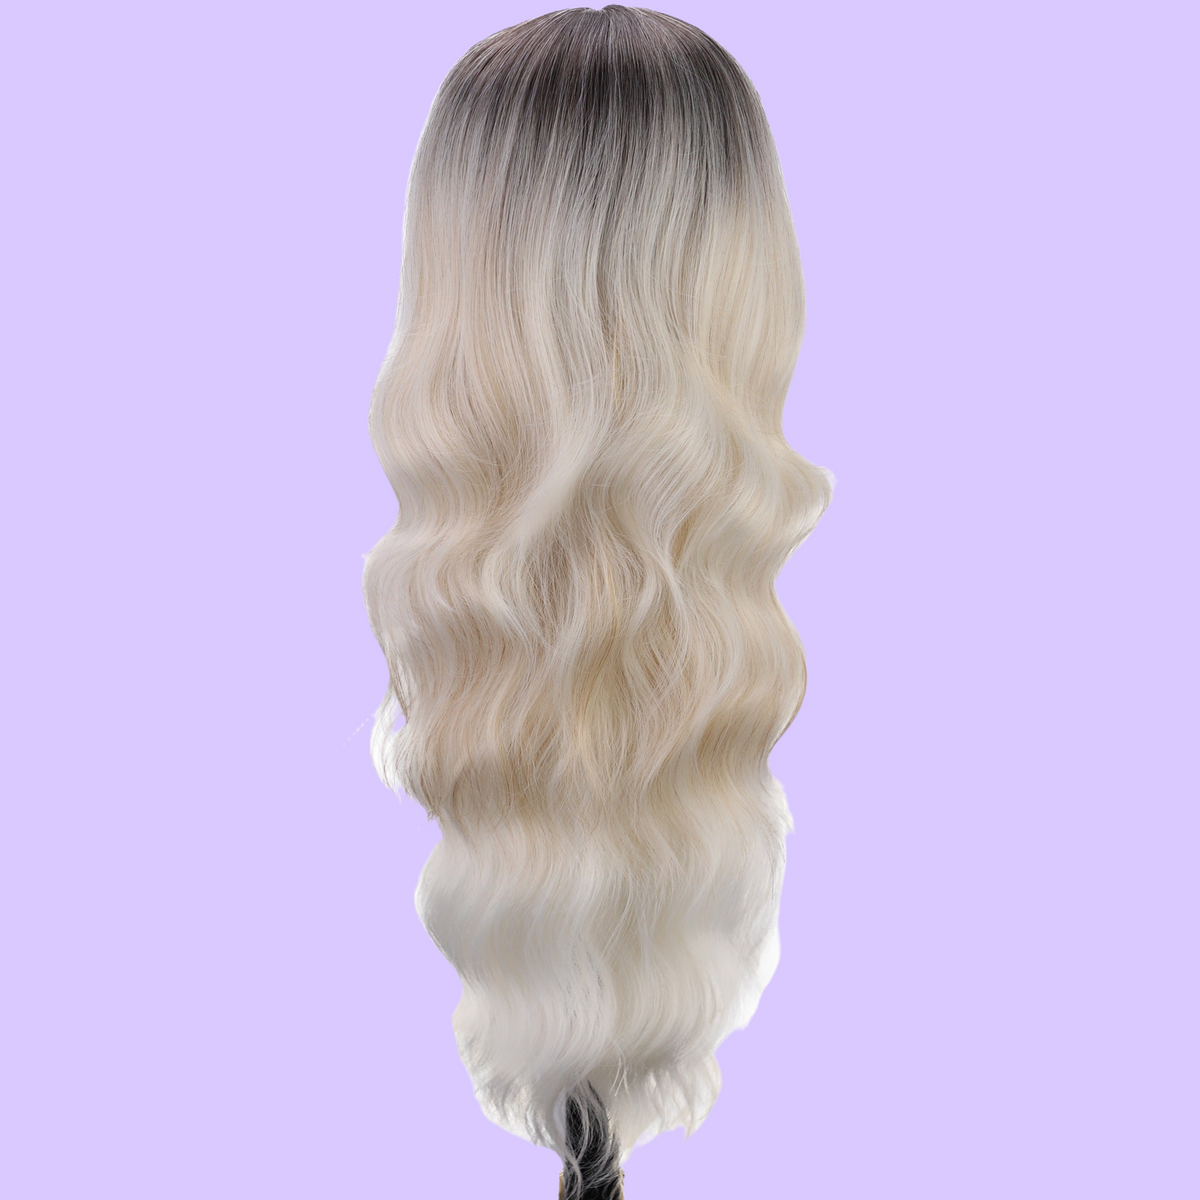 a long blonde wig on a purple background